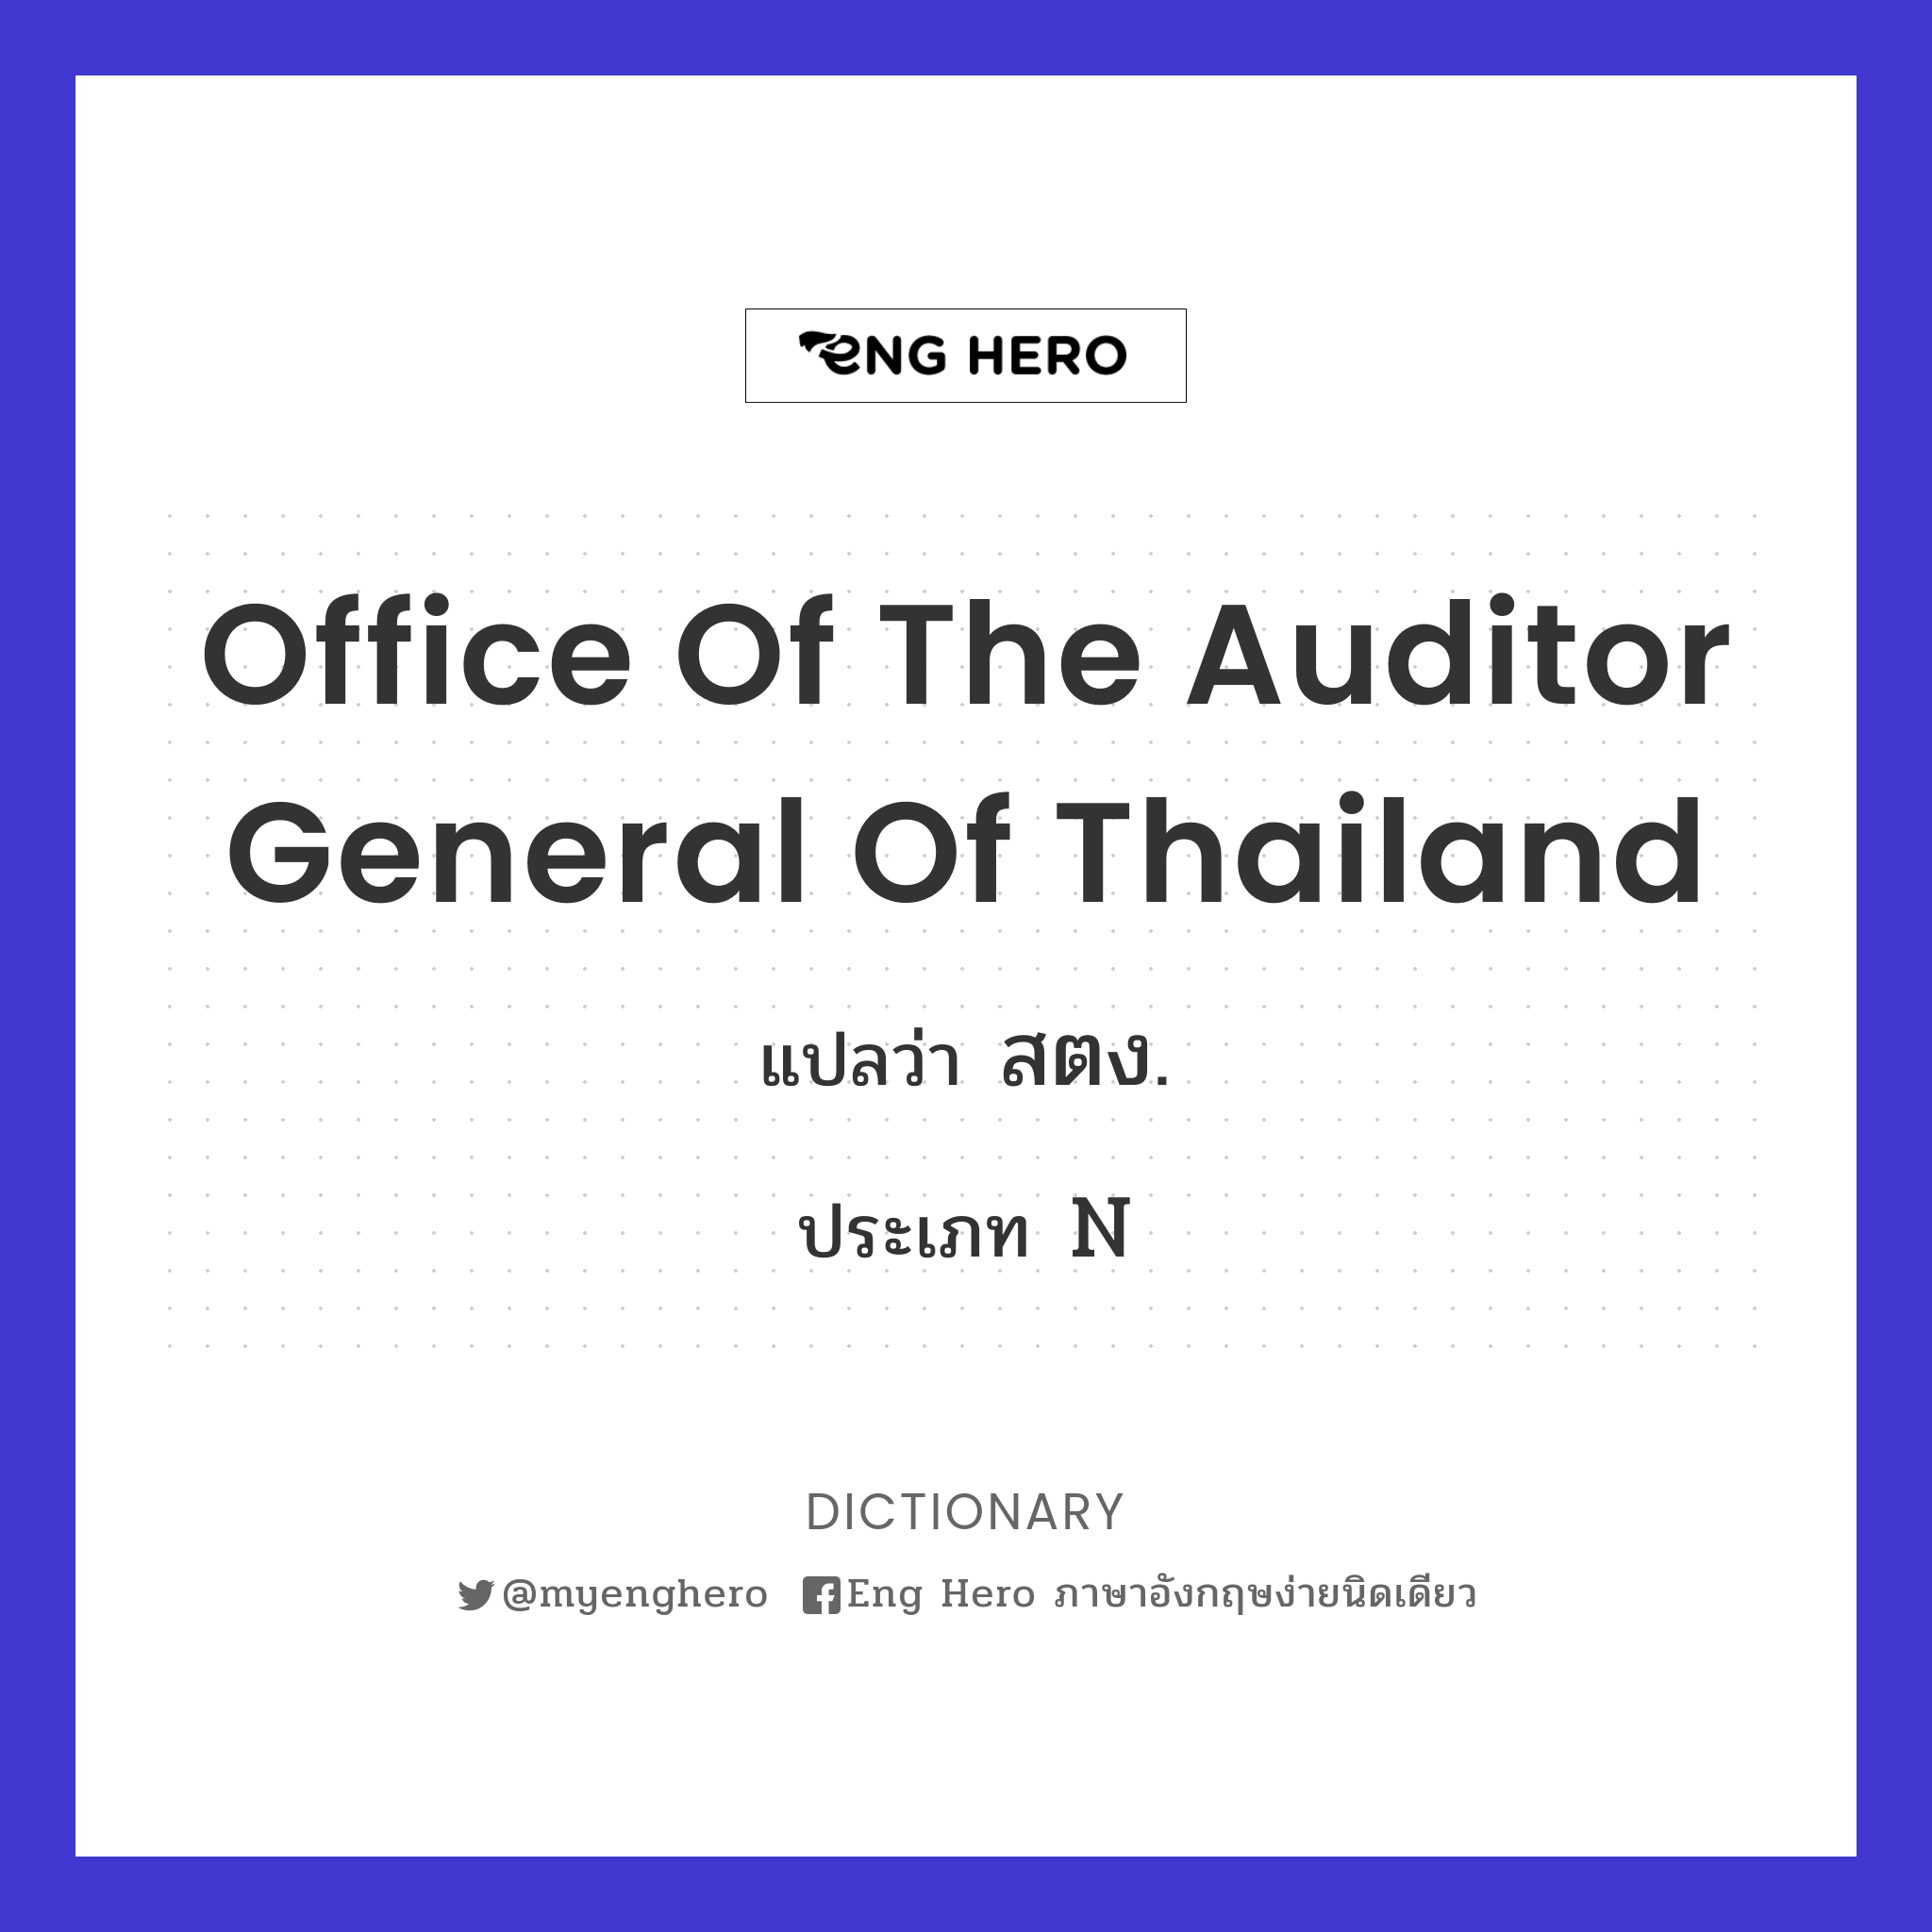 Office of the Auditor General of Thailand